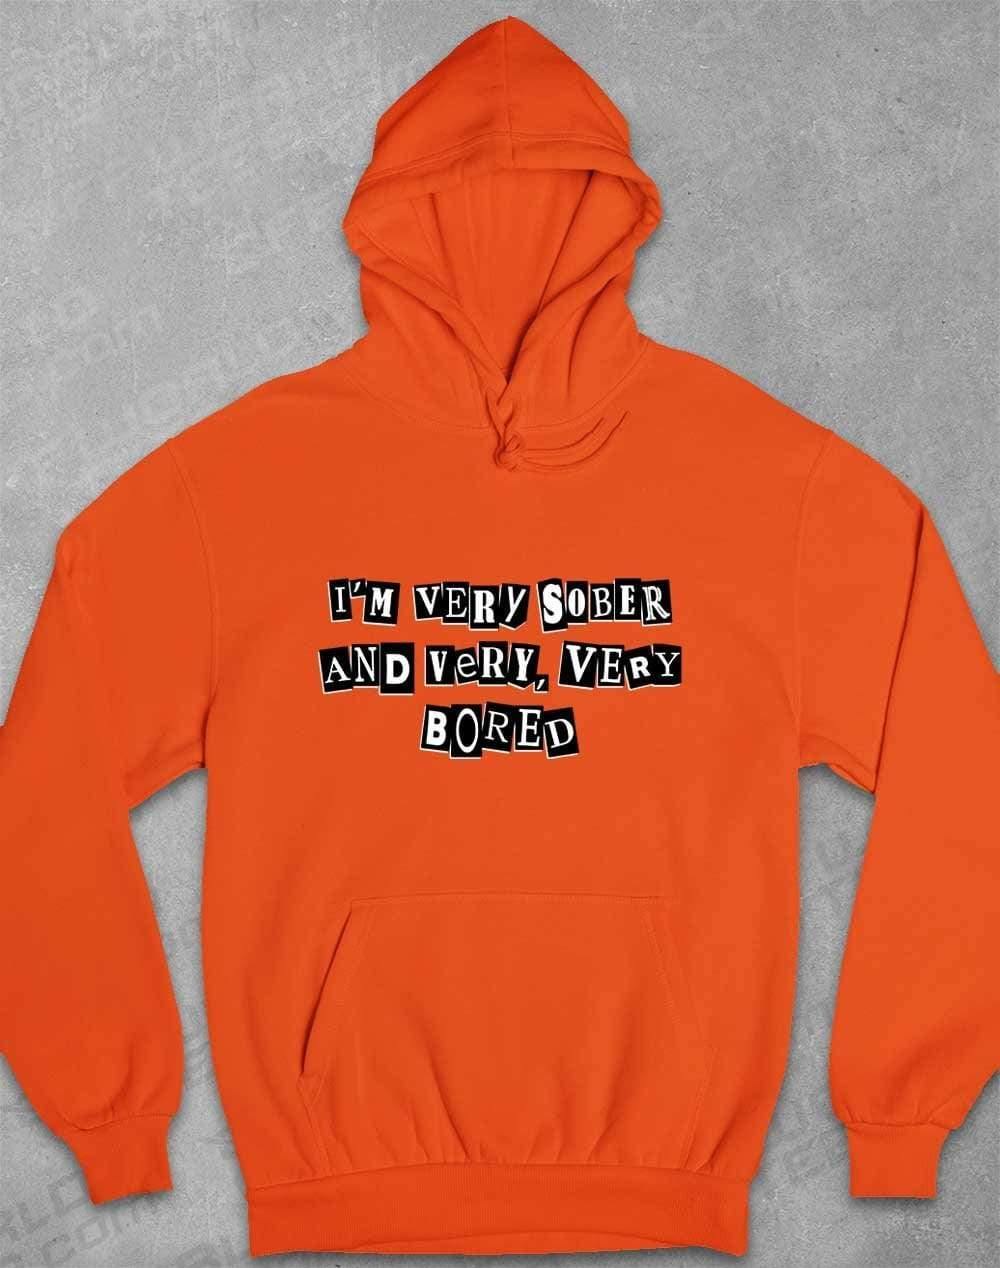 I'm Very Sober and Very Very Bored Hoodie XS / Sunset Orange  - Off World Tees